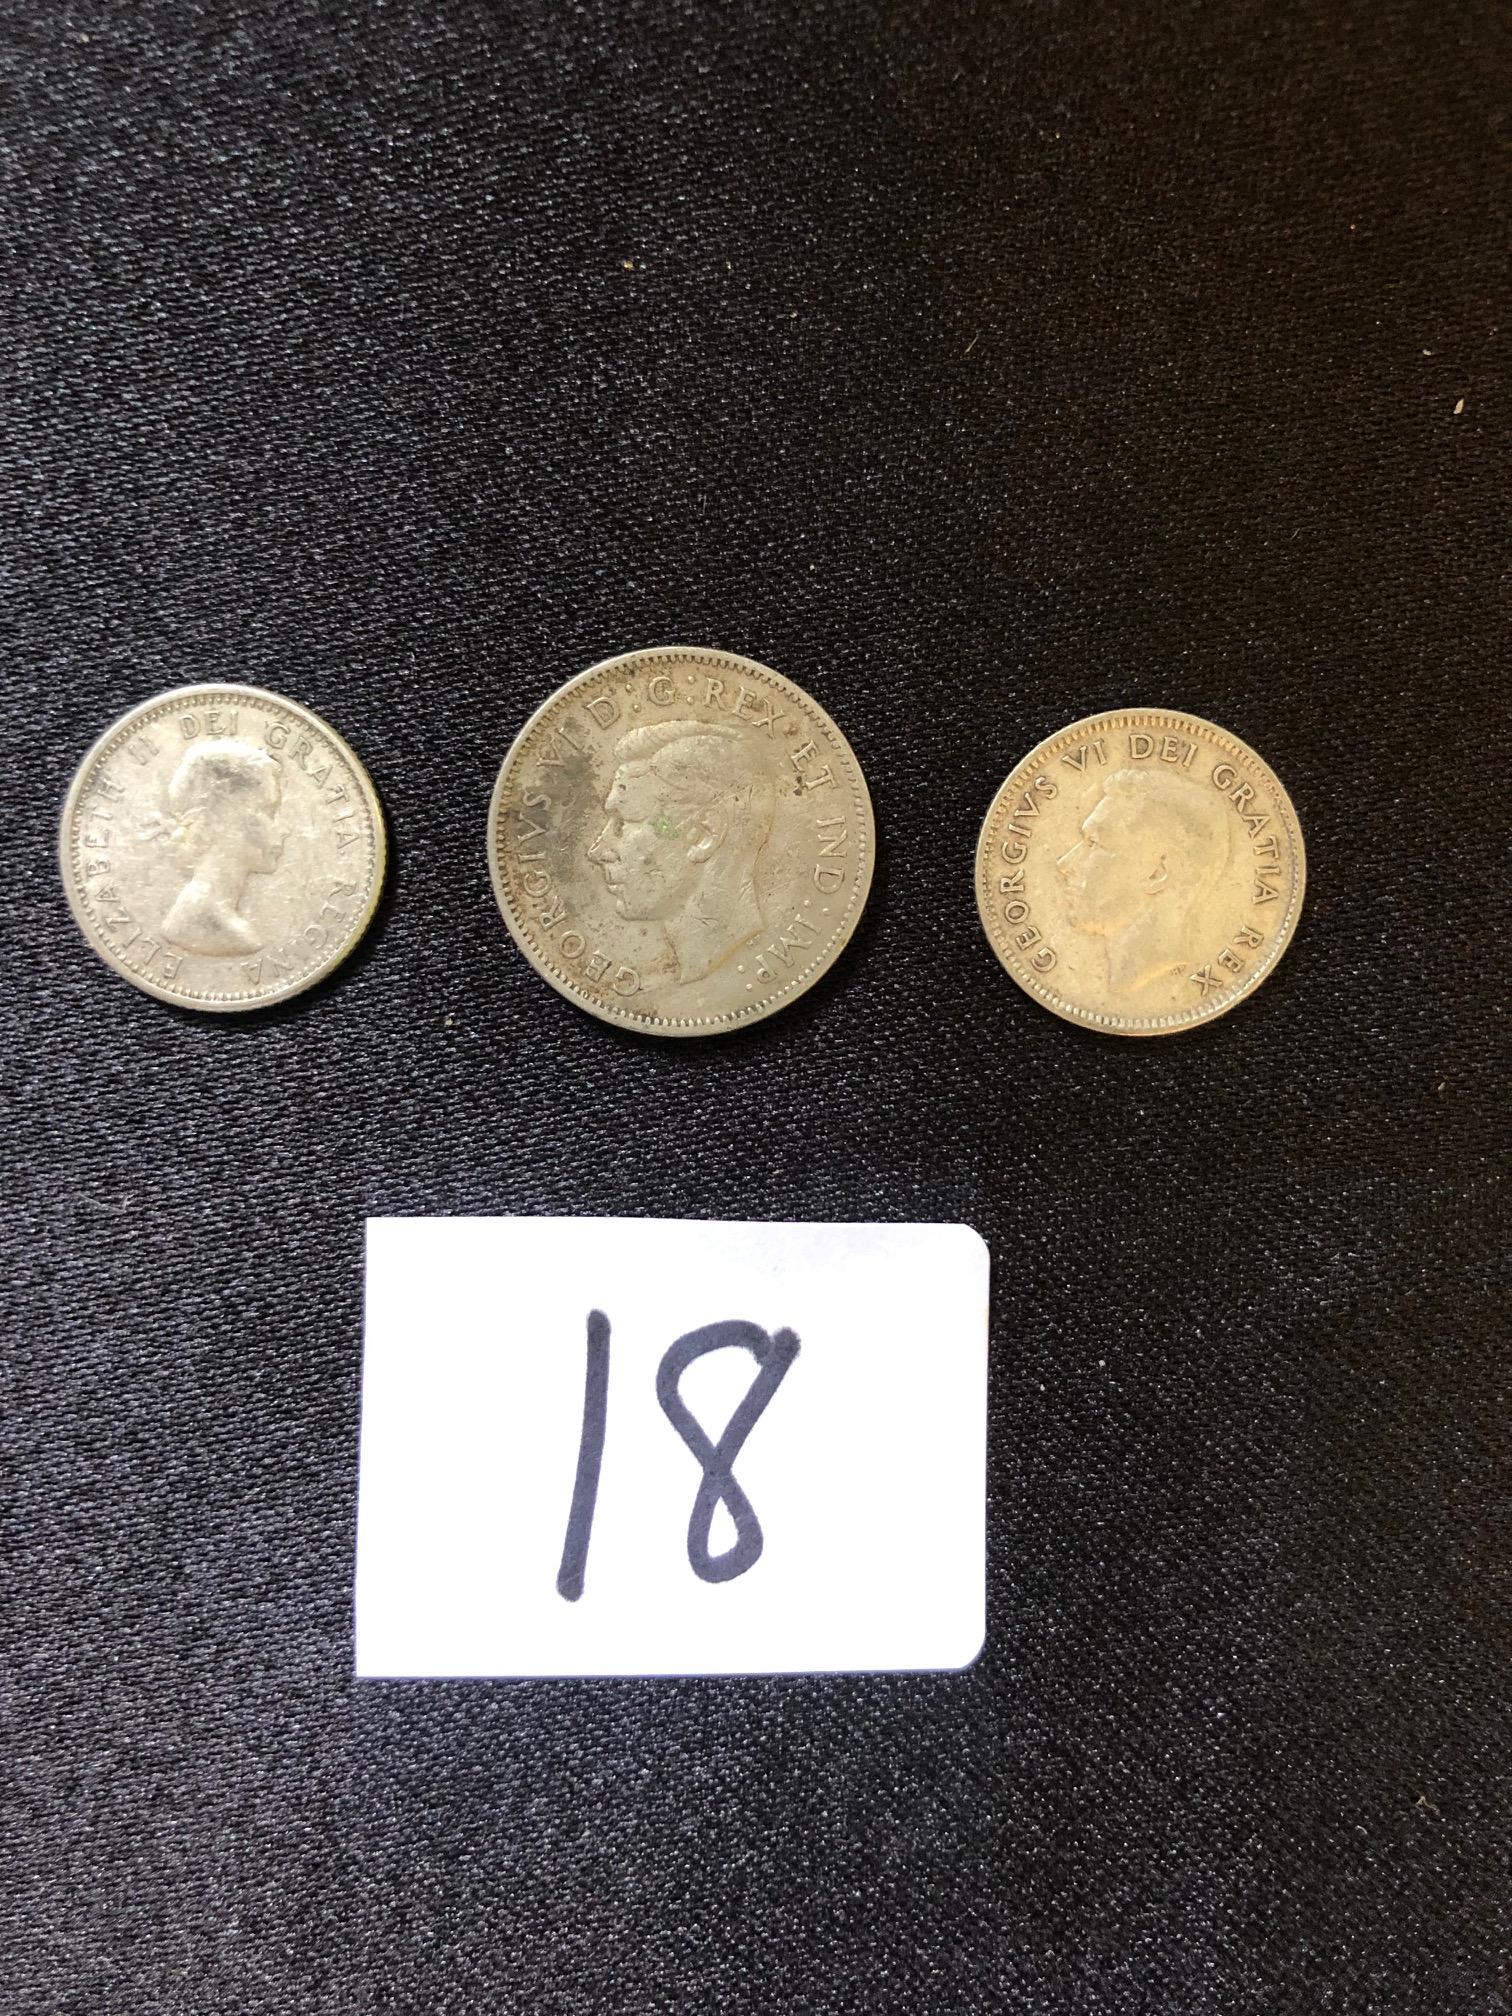 (3) Canadian coins